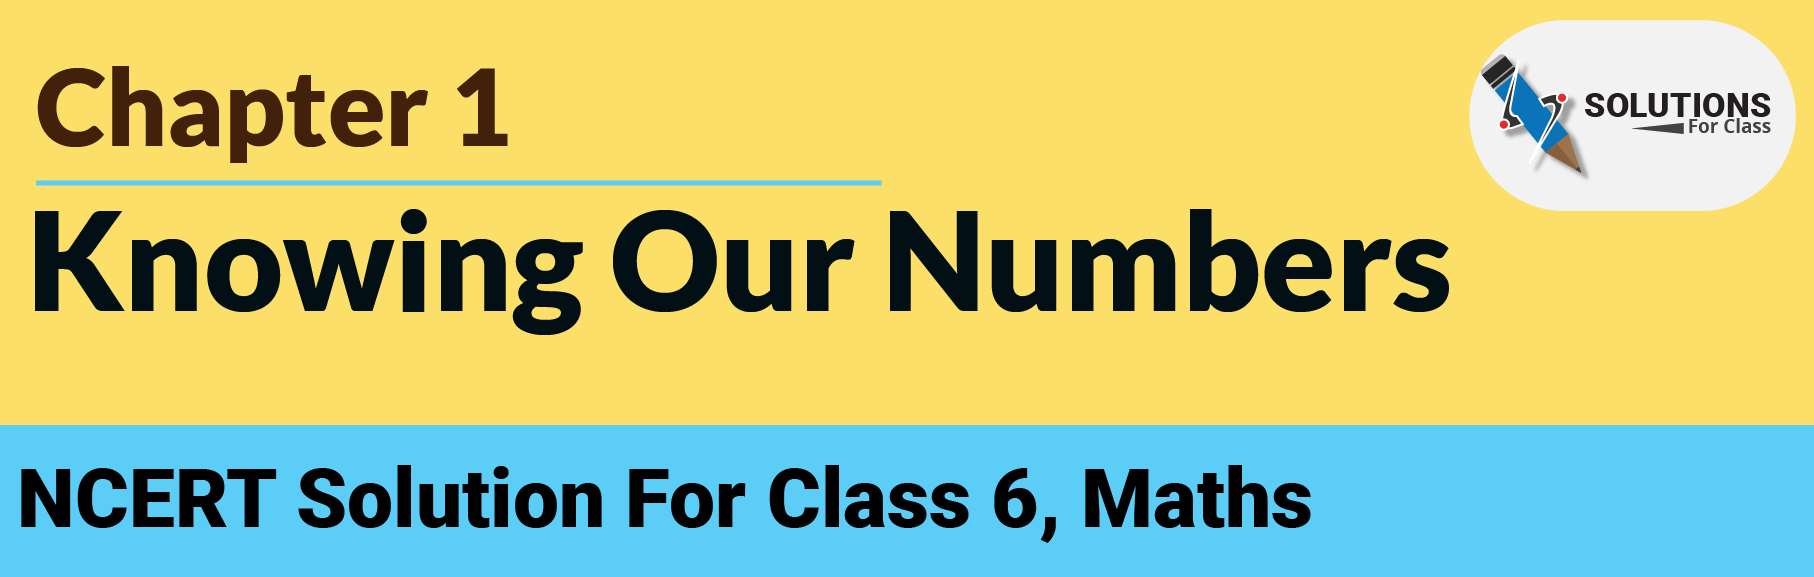 NCERT Solution For Class 6, Maths, Chapter 1, Knowing Our Numbers